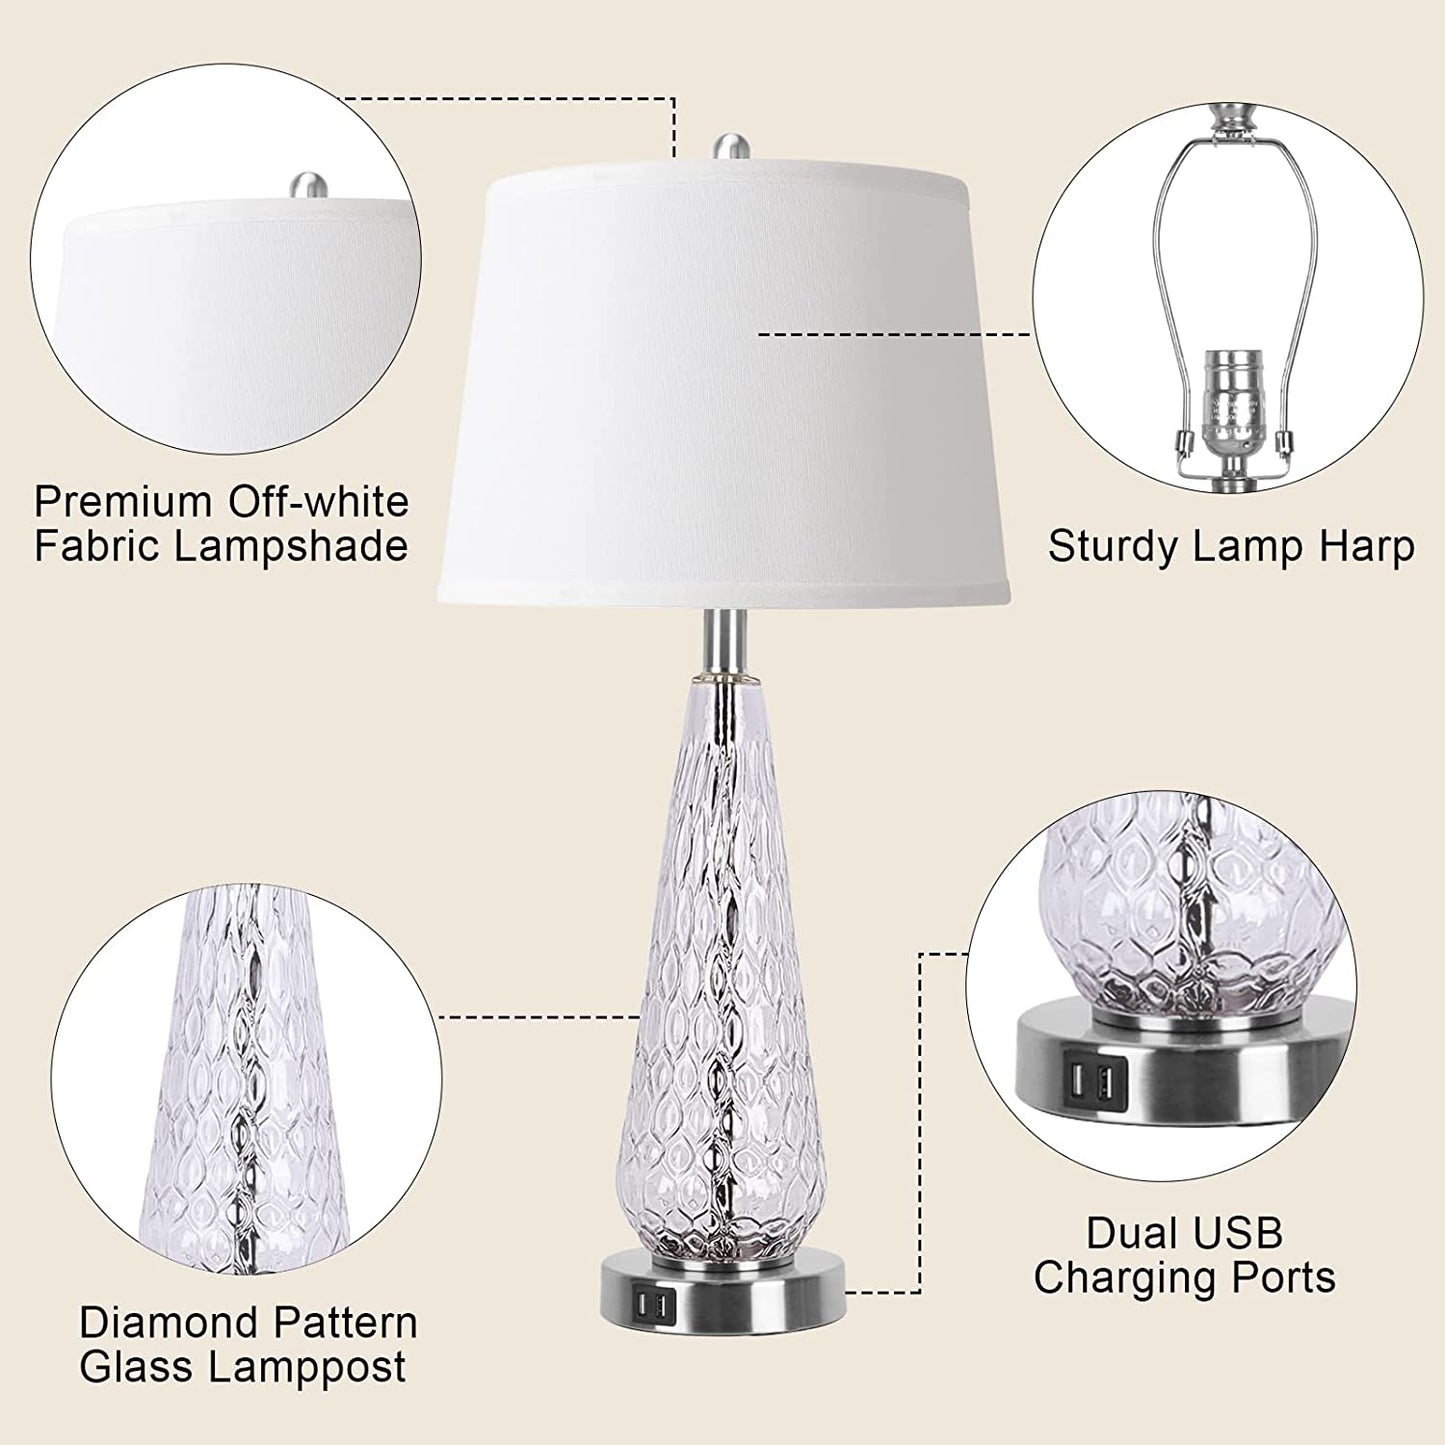 Modern Clearance Glass 27" Tall Table Lamps for Living Room Set of 2